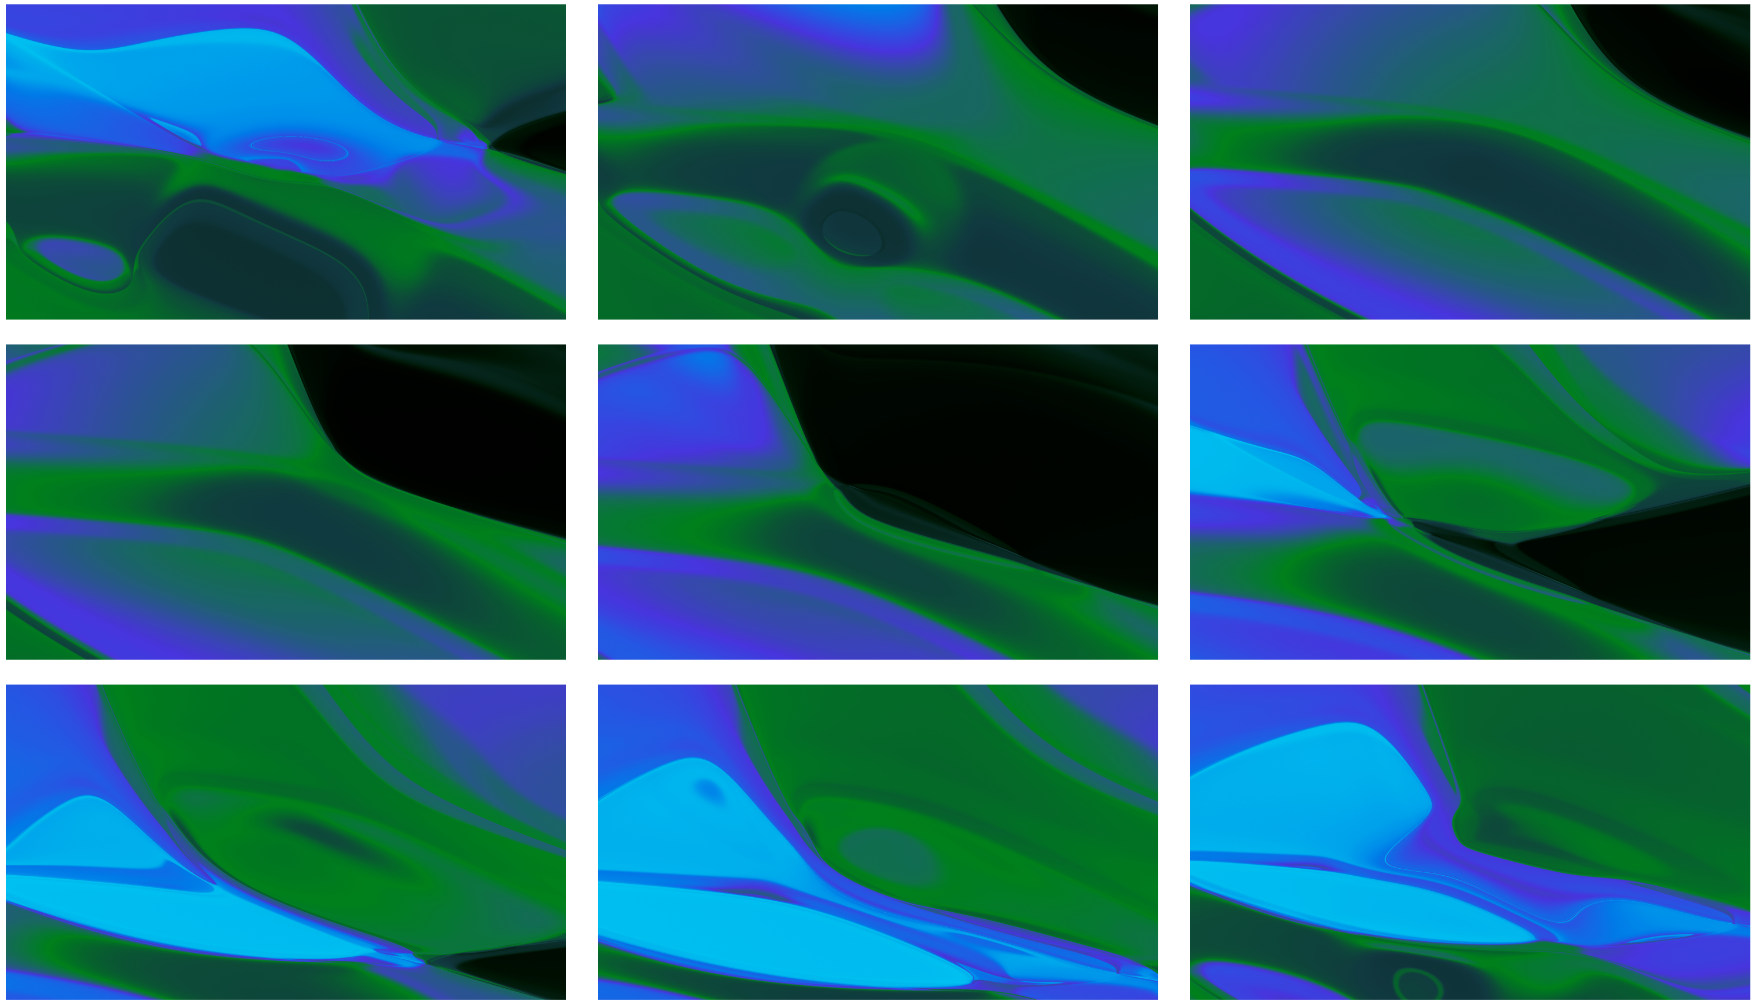 Sample frames of a CPPN animation video